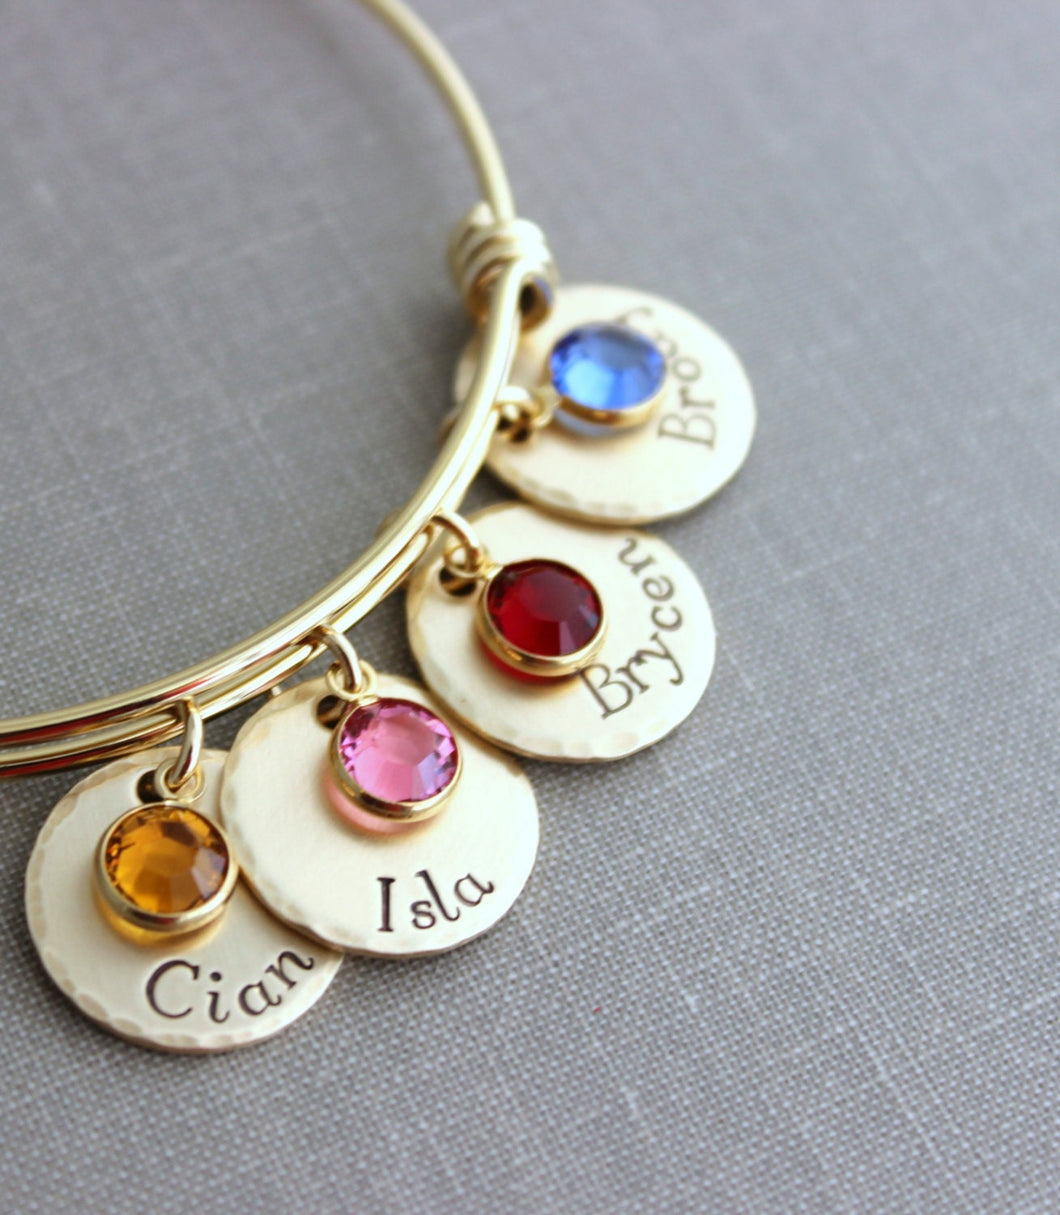 Gold plated stainless steel bracelet, Children's names Hand stamped NuGold discs, Swarovski crystal birthstones and wire bangle bracelet